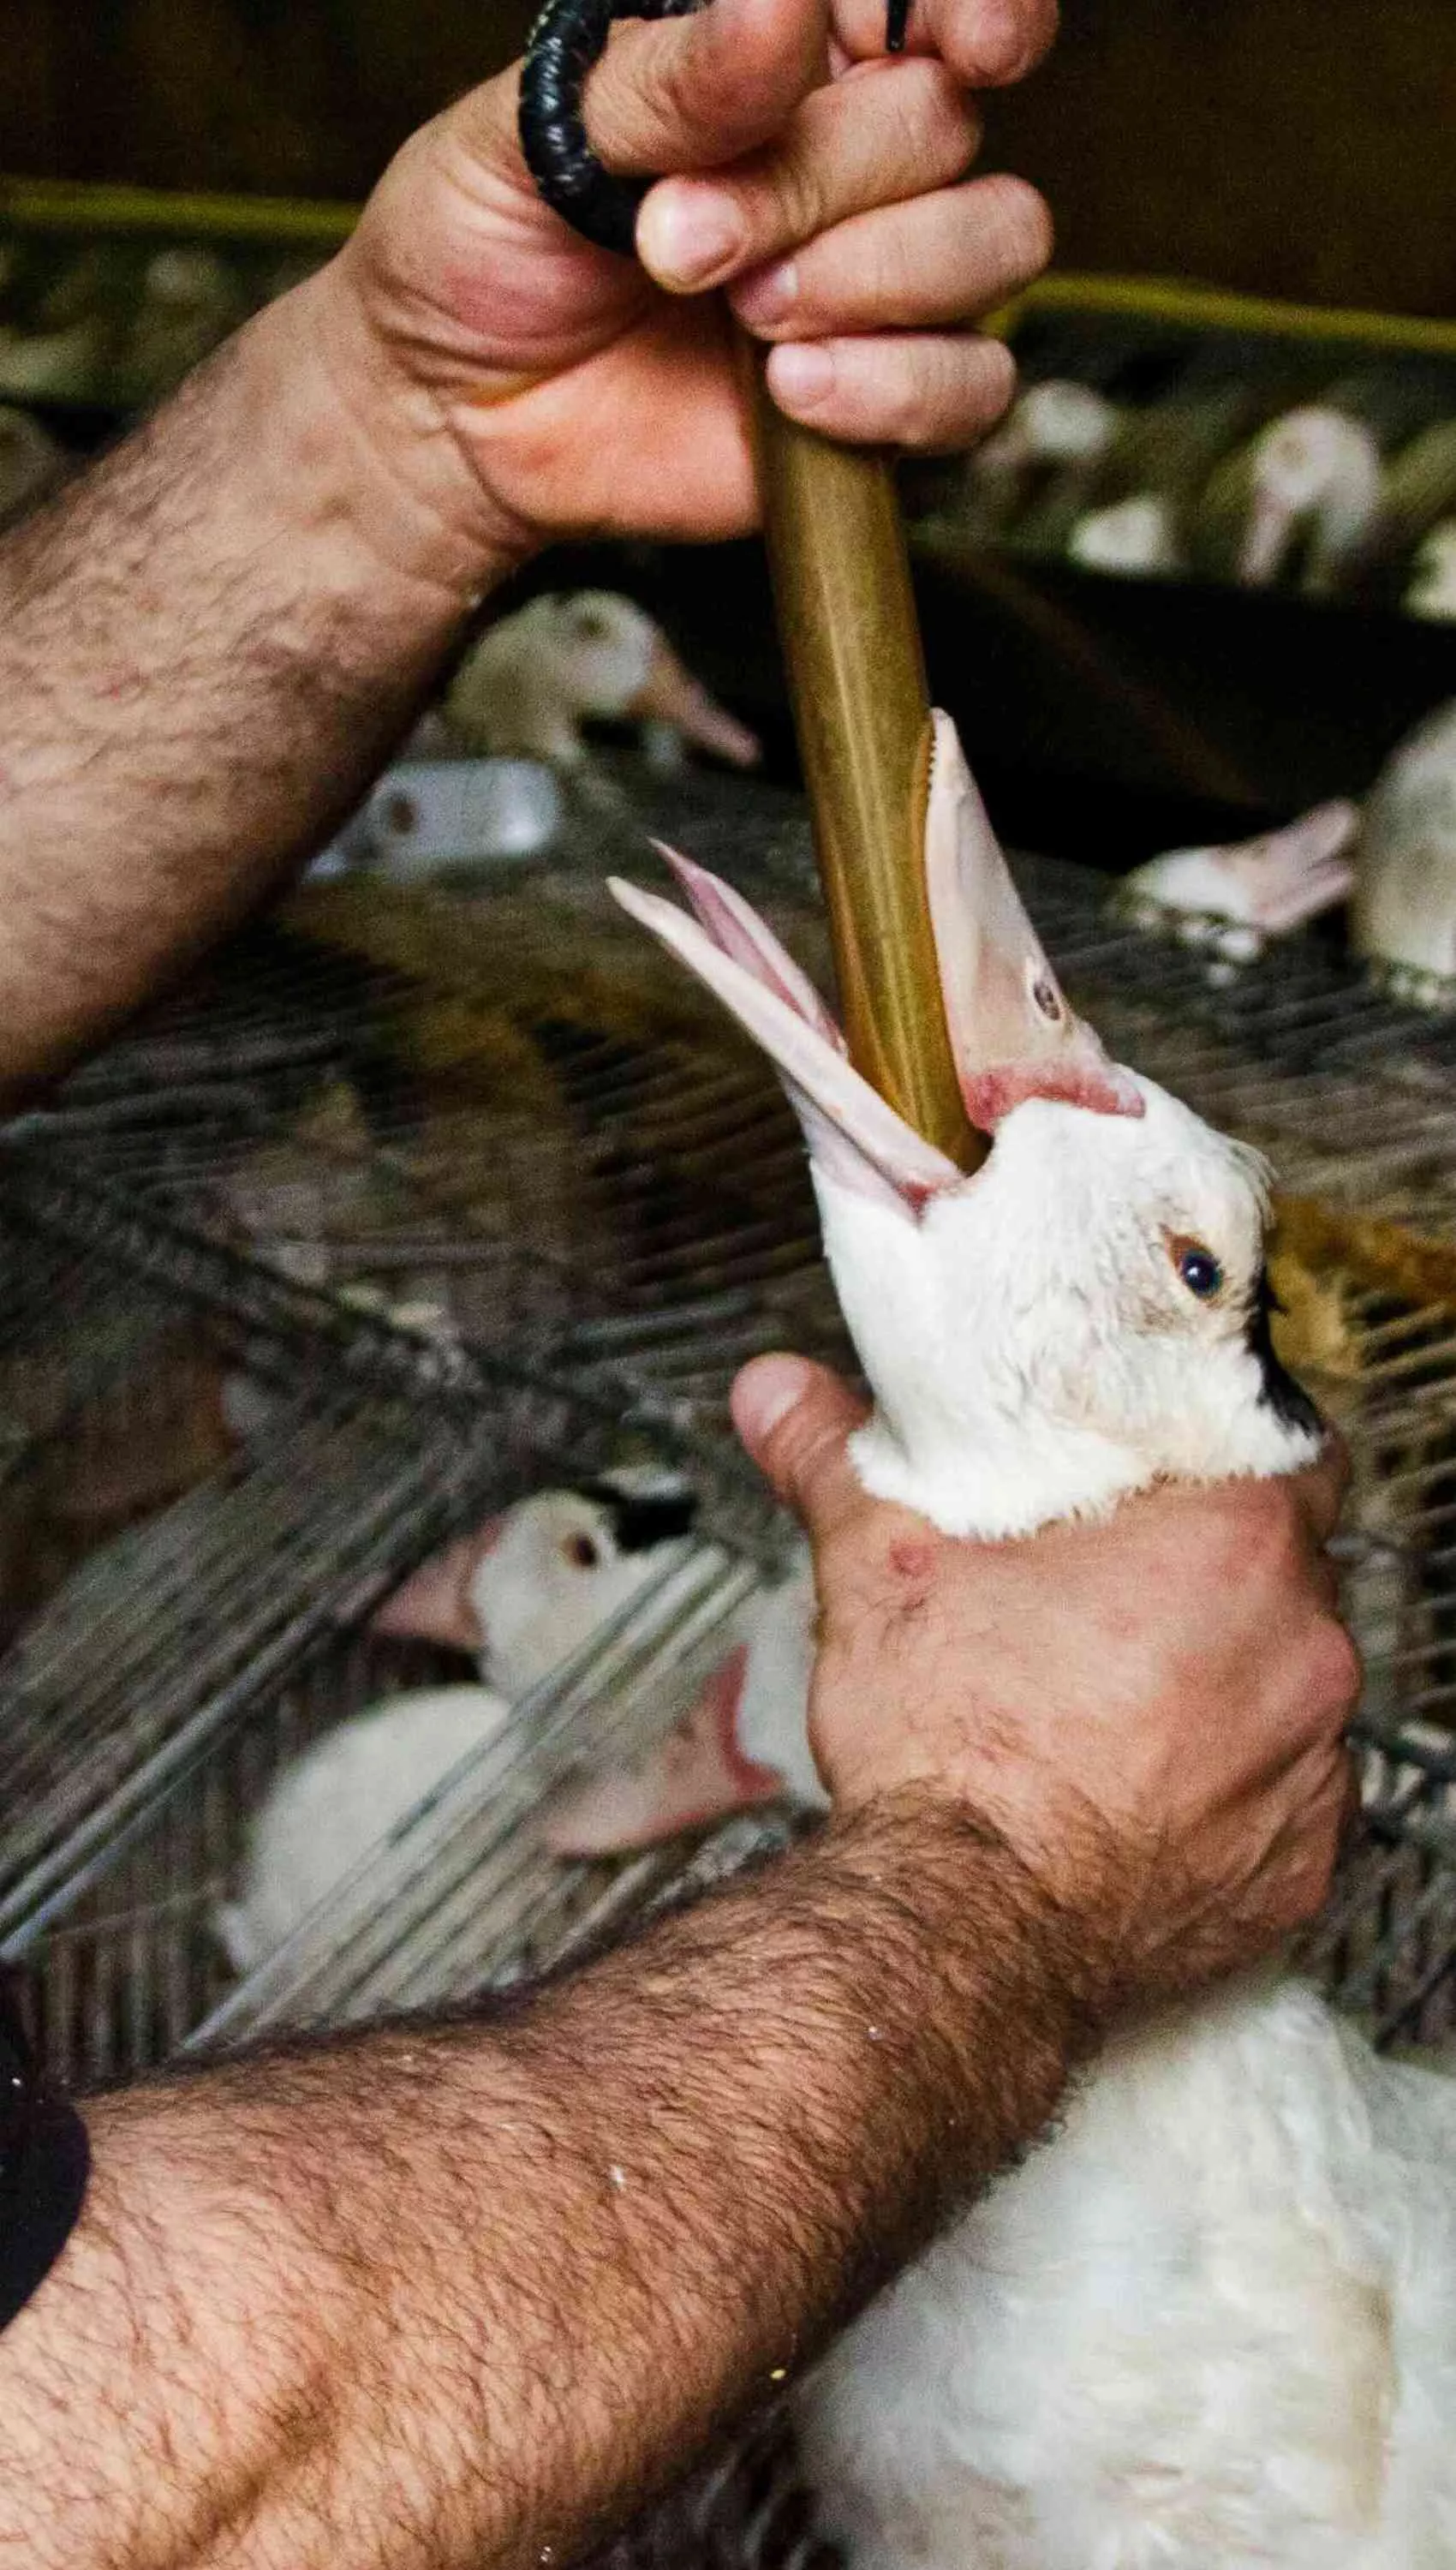 Duck being force fed for the production of foie gras